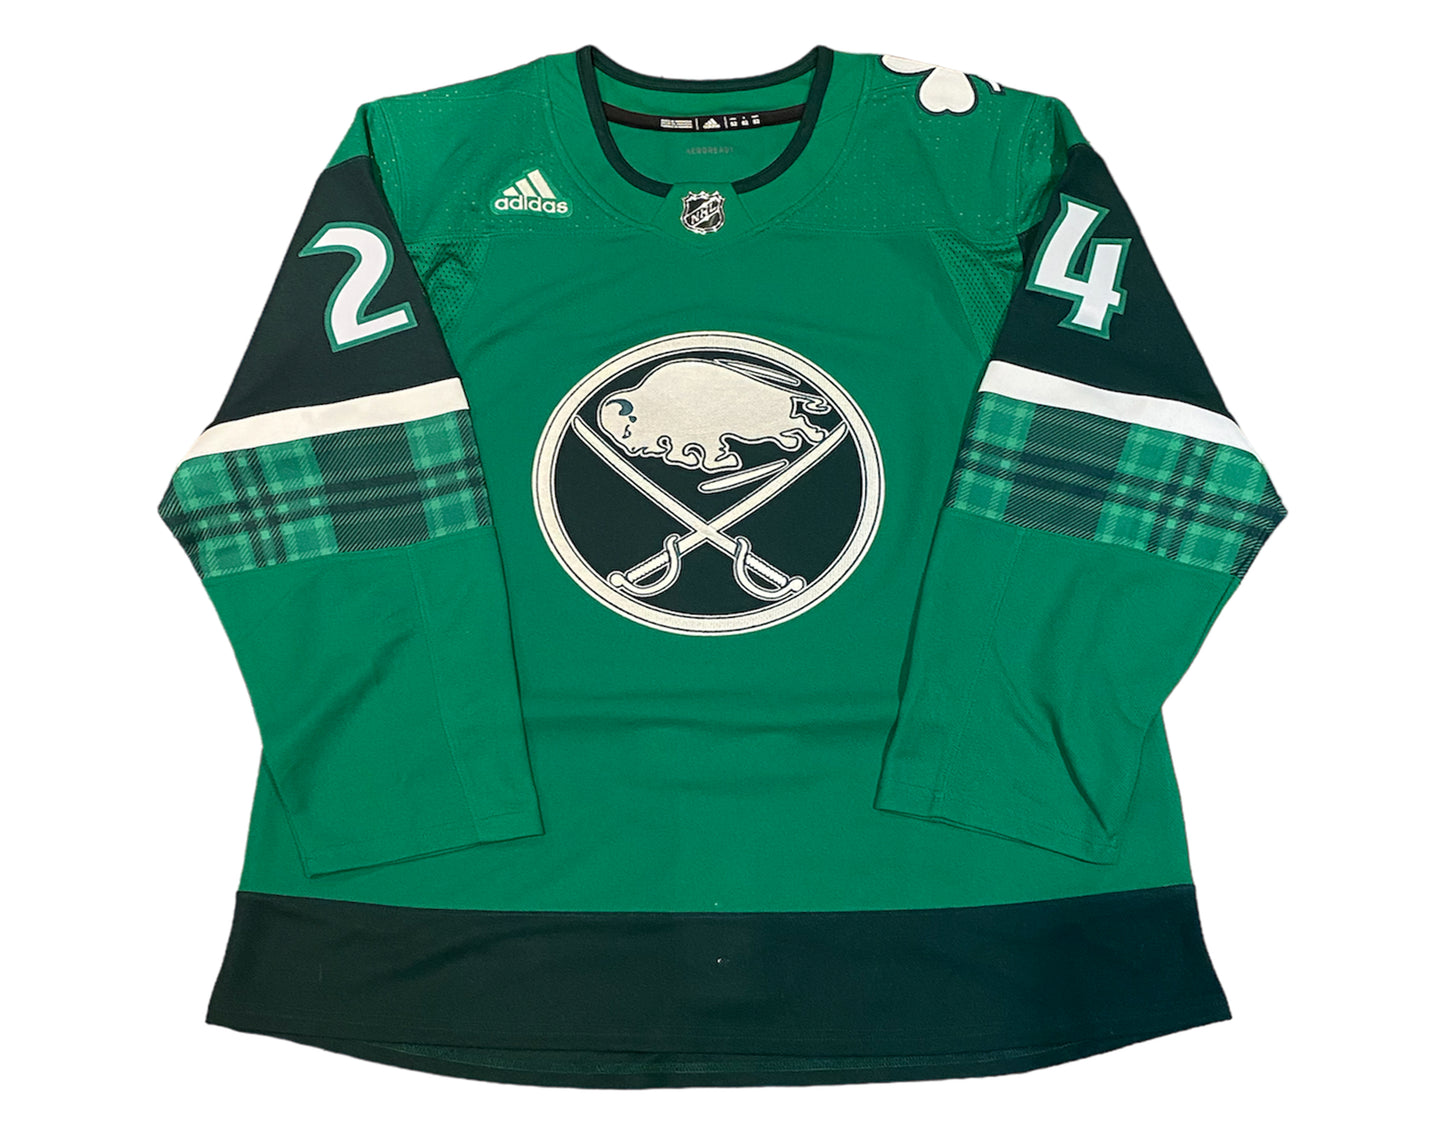 Dylan Cozens Autographed Buffalo Sabres St. Patrick's Day Adidas Jersey